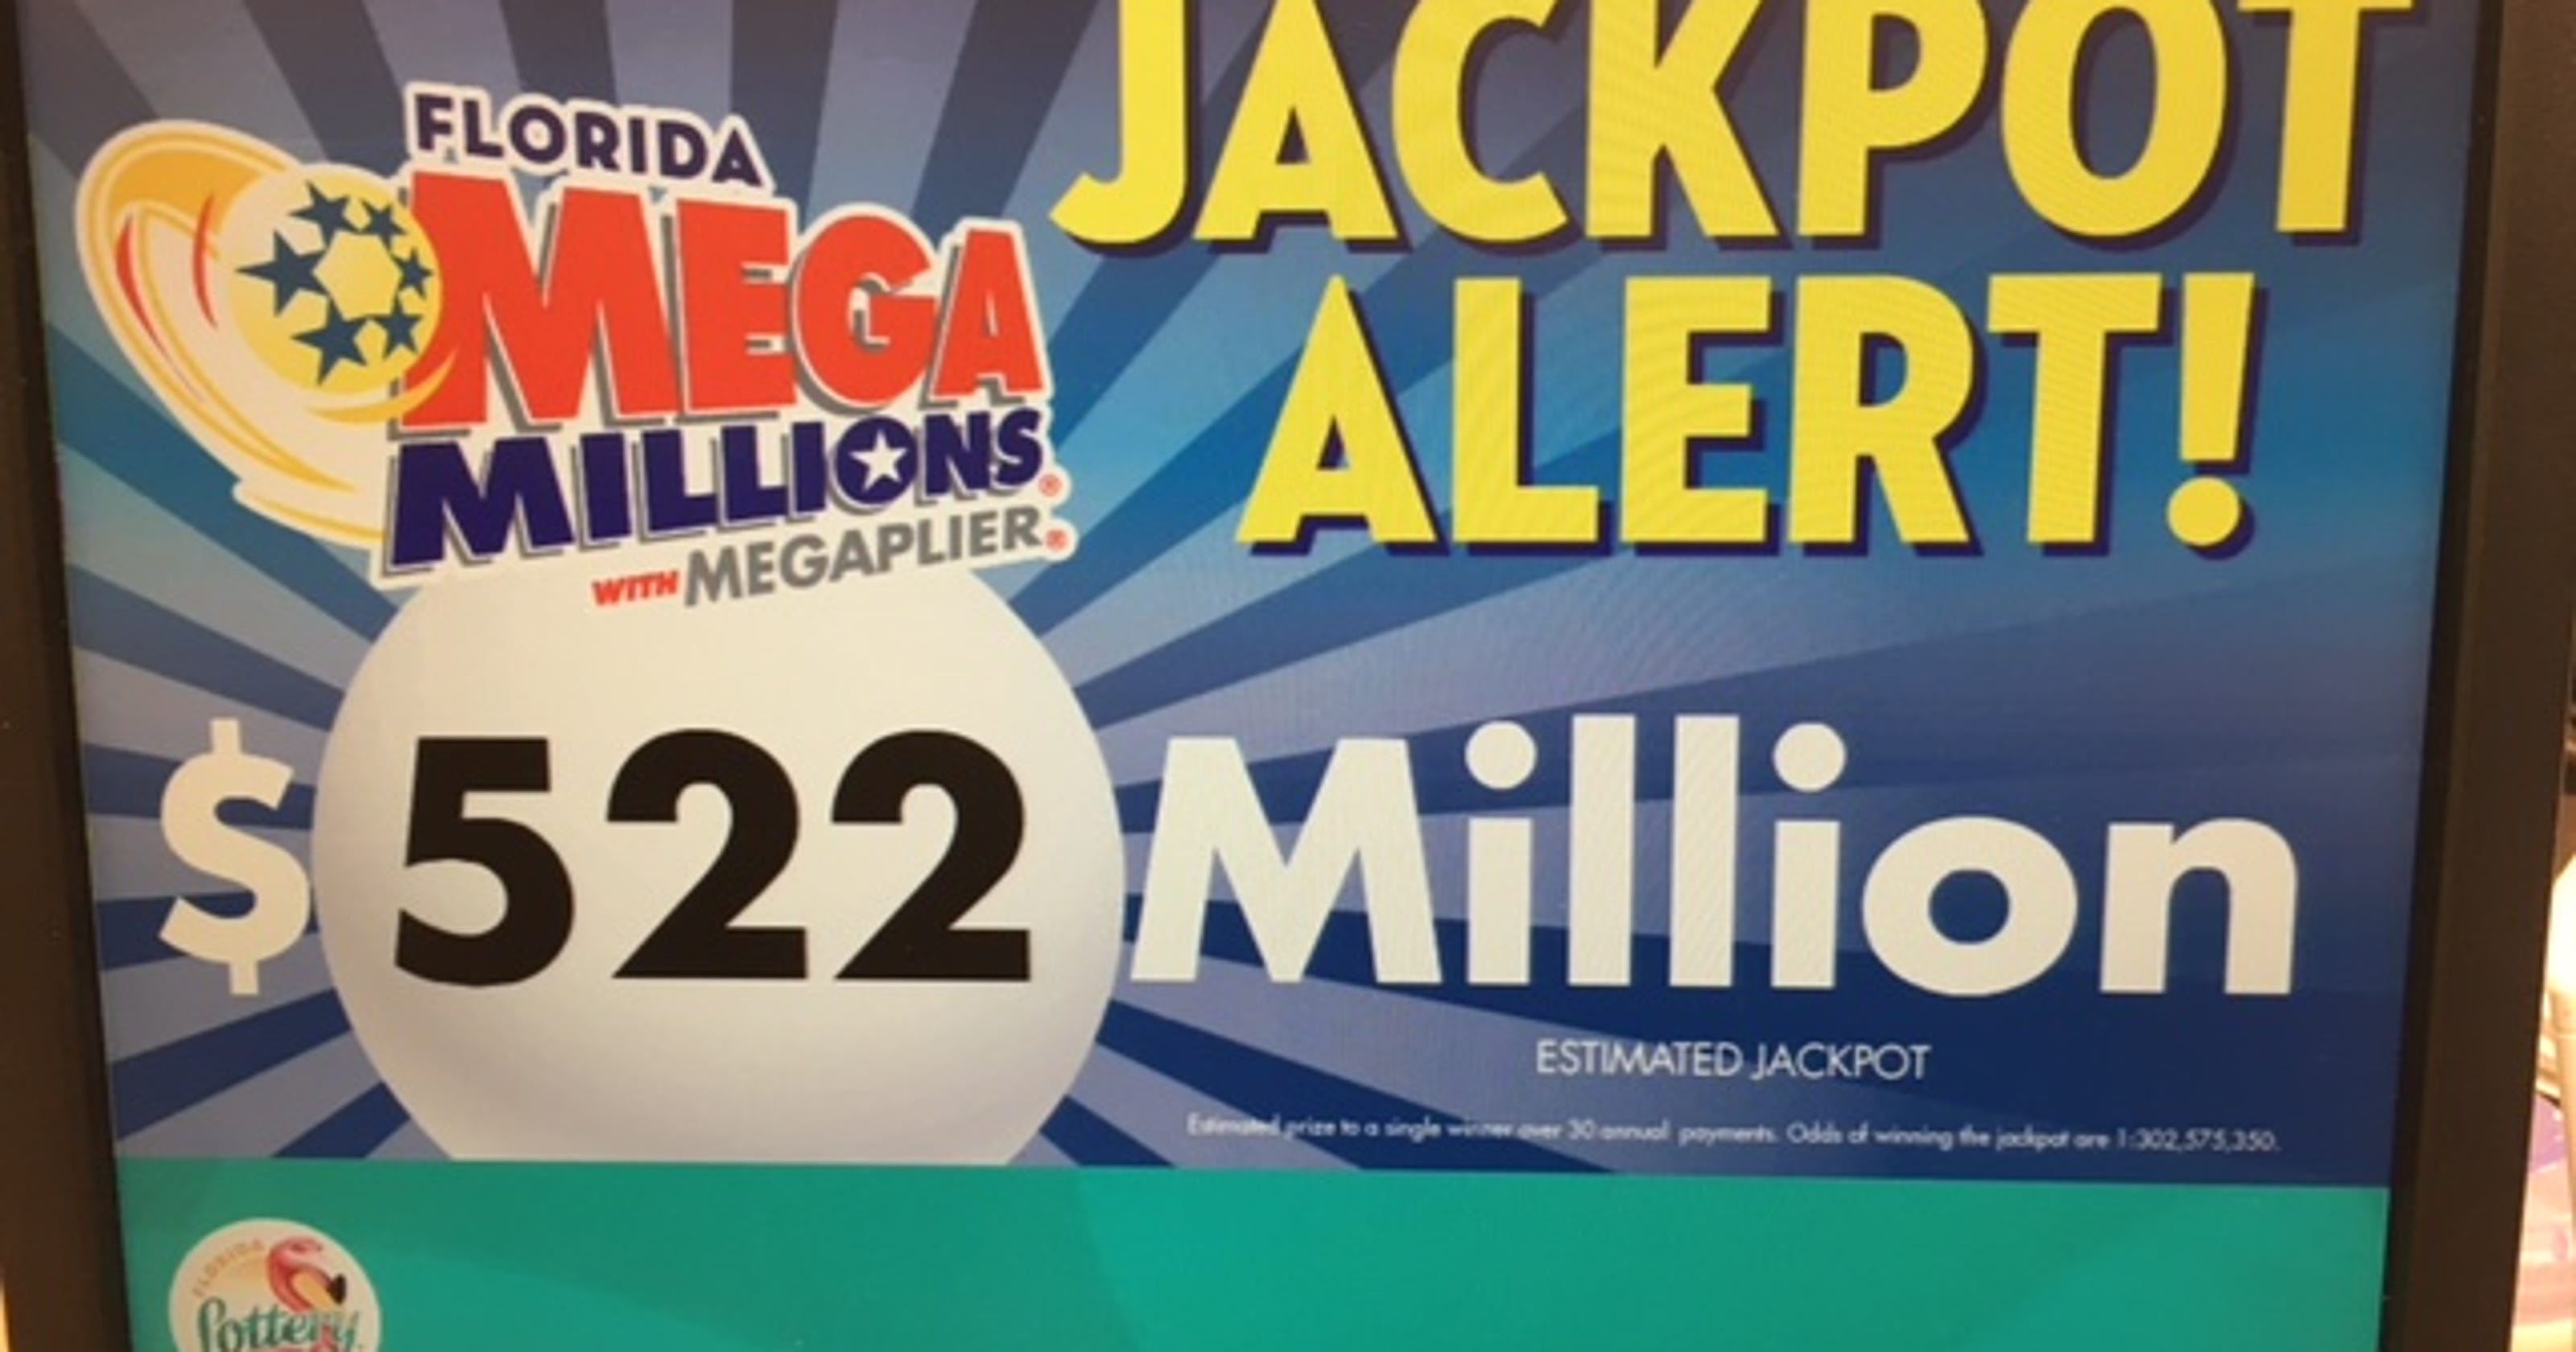 Here are the winning numbers for the 522 million jackpot